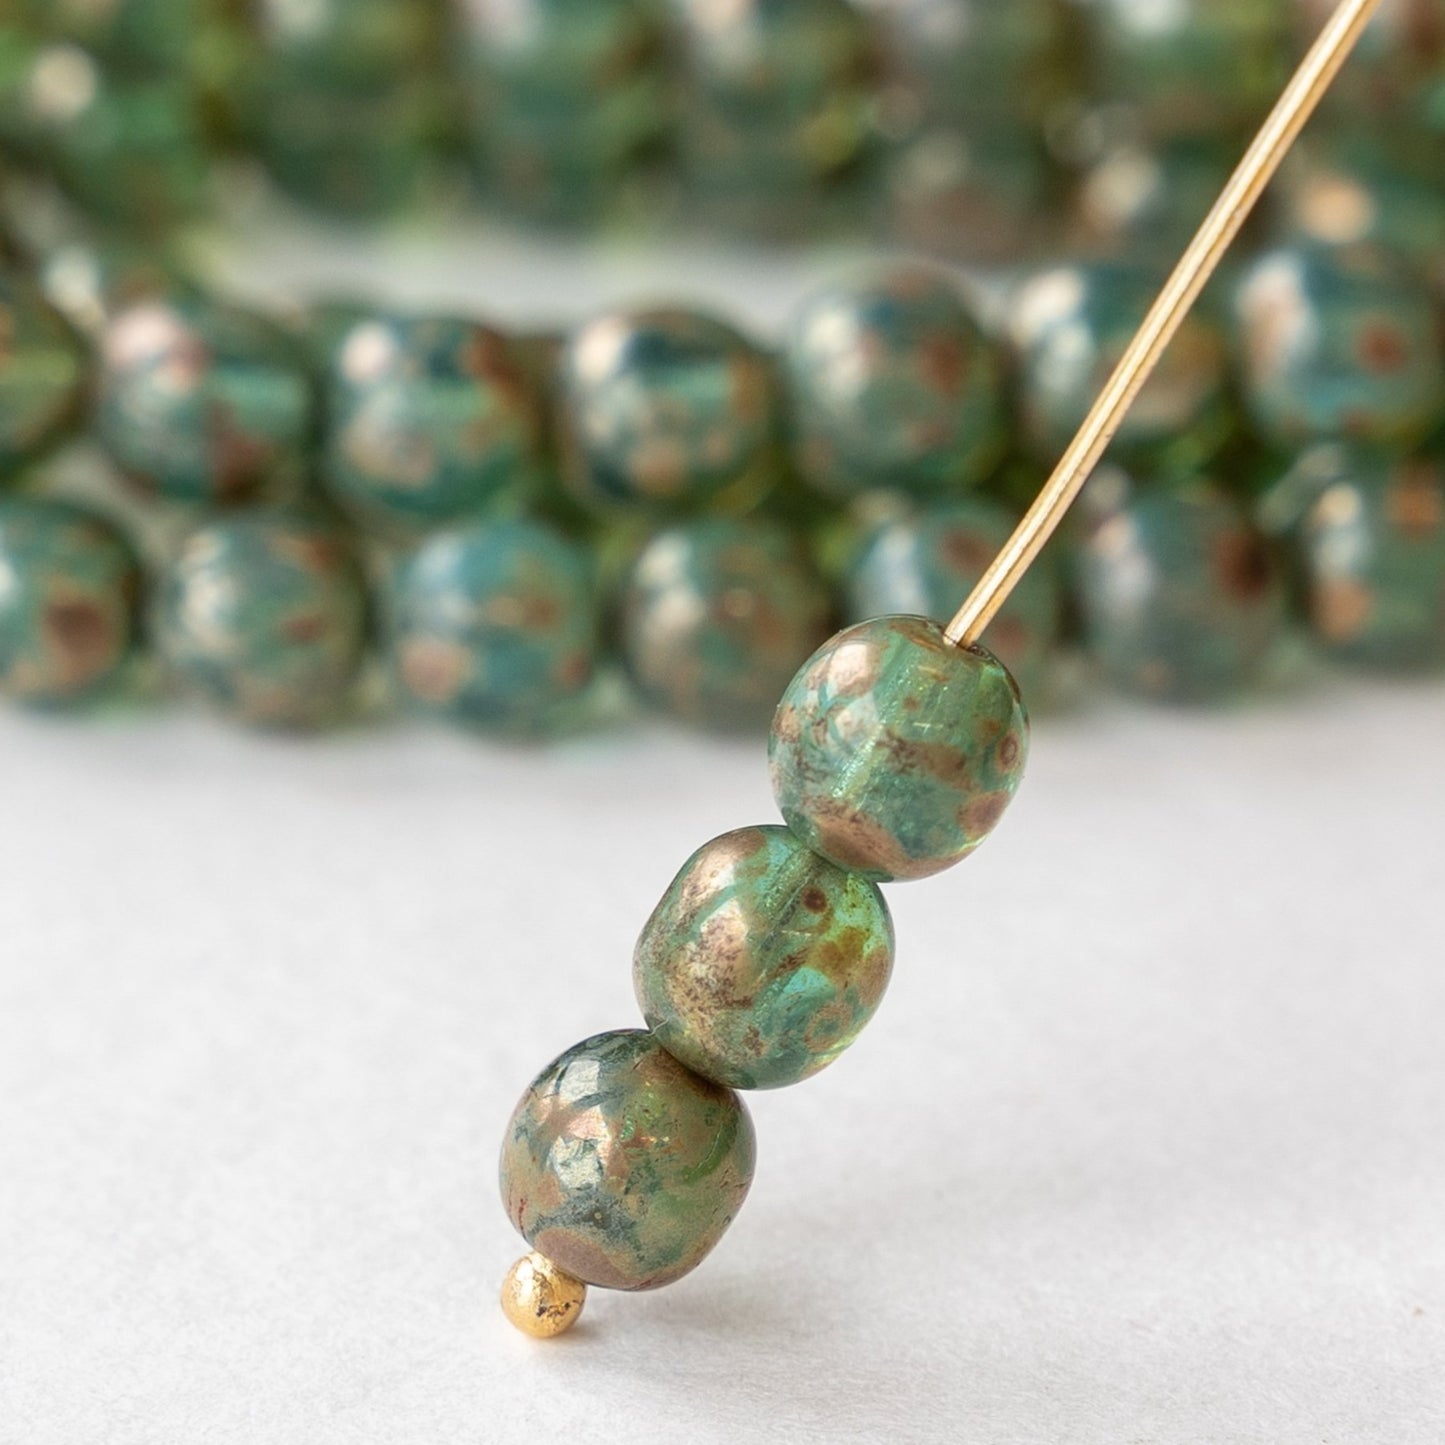 6mm Round Glass Beads - Blue Green Picasso - 50 Beads